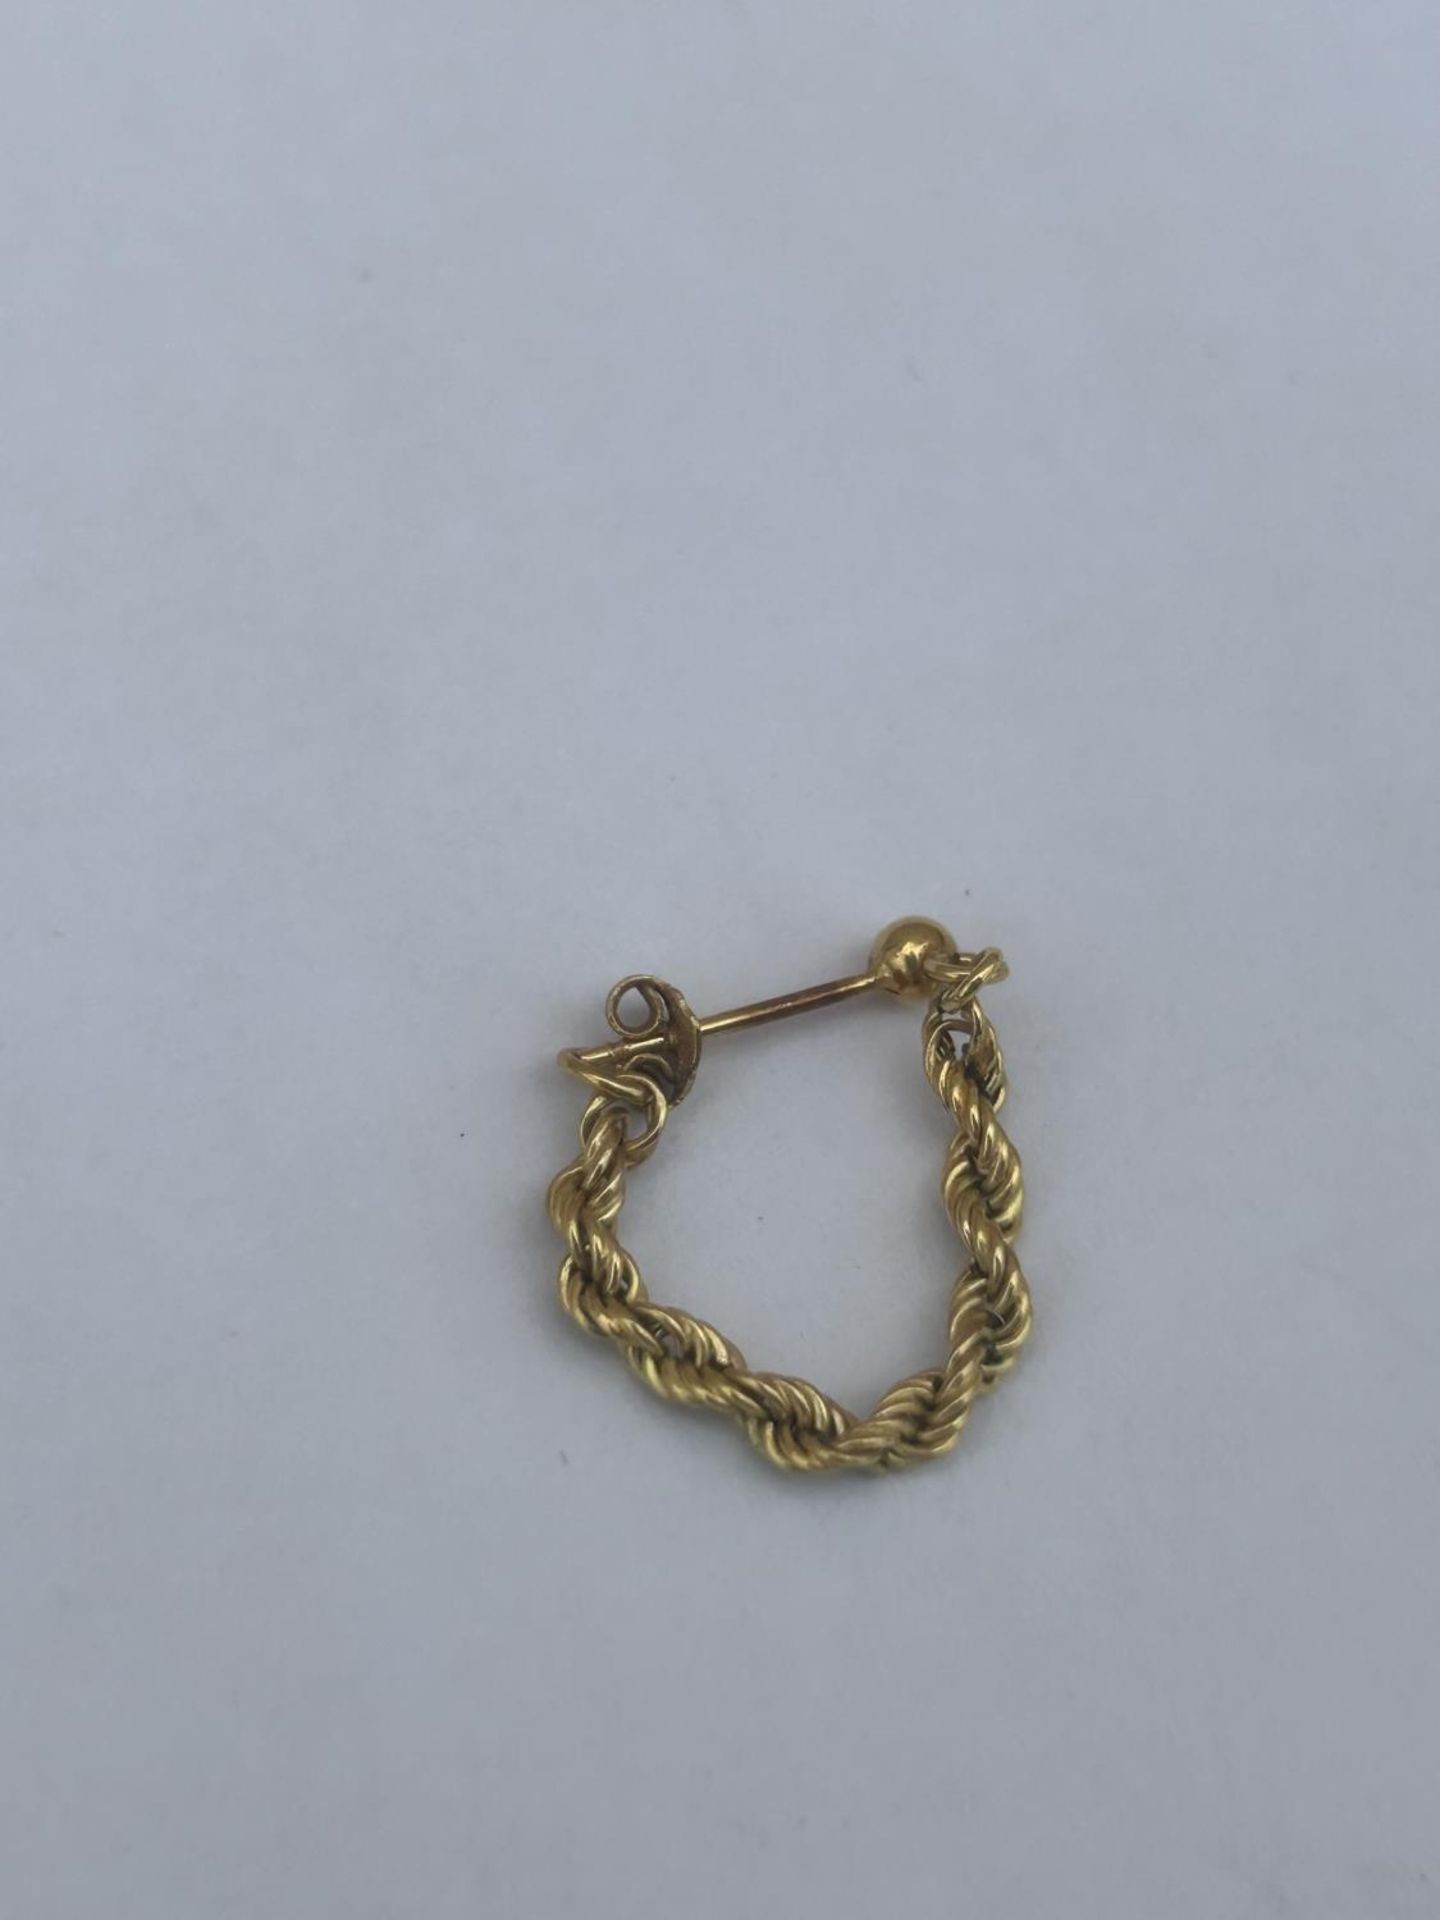 A PAIR OF 9CT GOLD ROPE TWIST EARRINGS, WEIGHT 1.1 G - Image 3 of 3